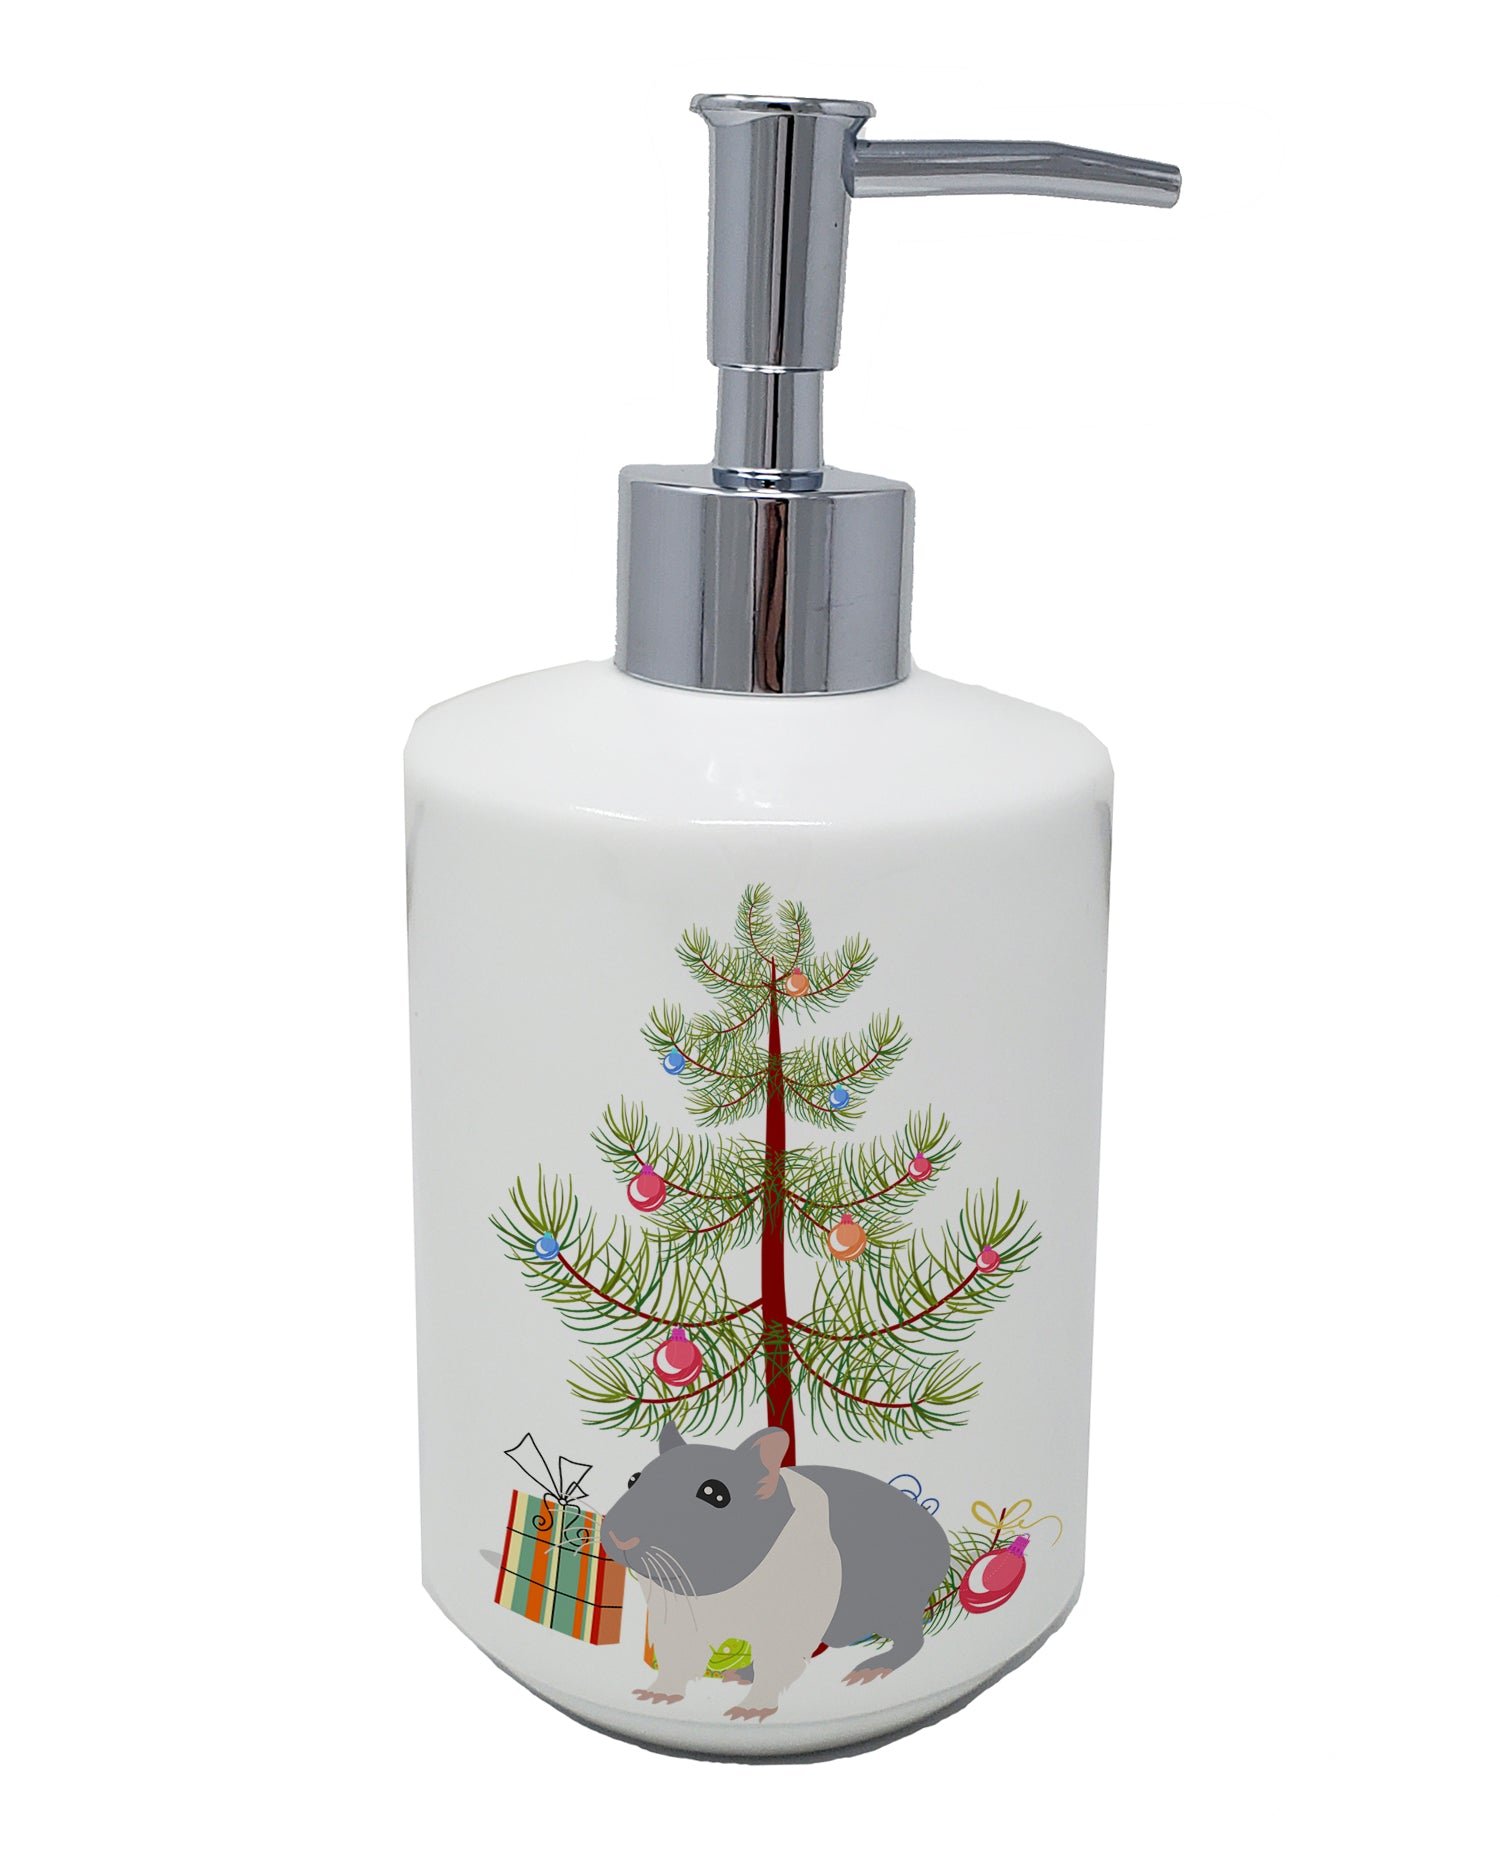 Buy this South African Hamster Merry Christmas Ceramic Soap Dispenser